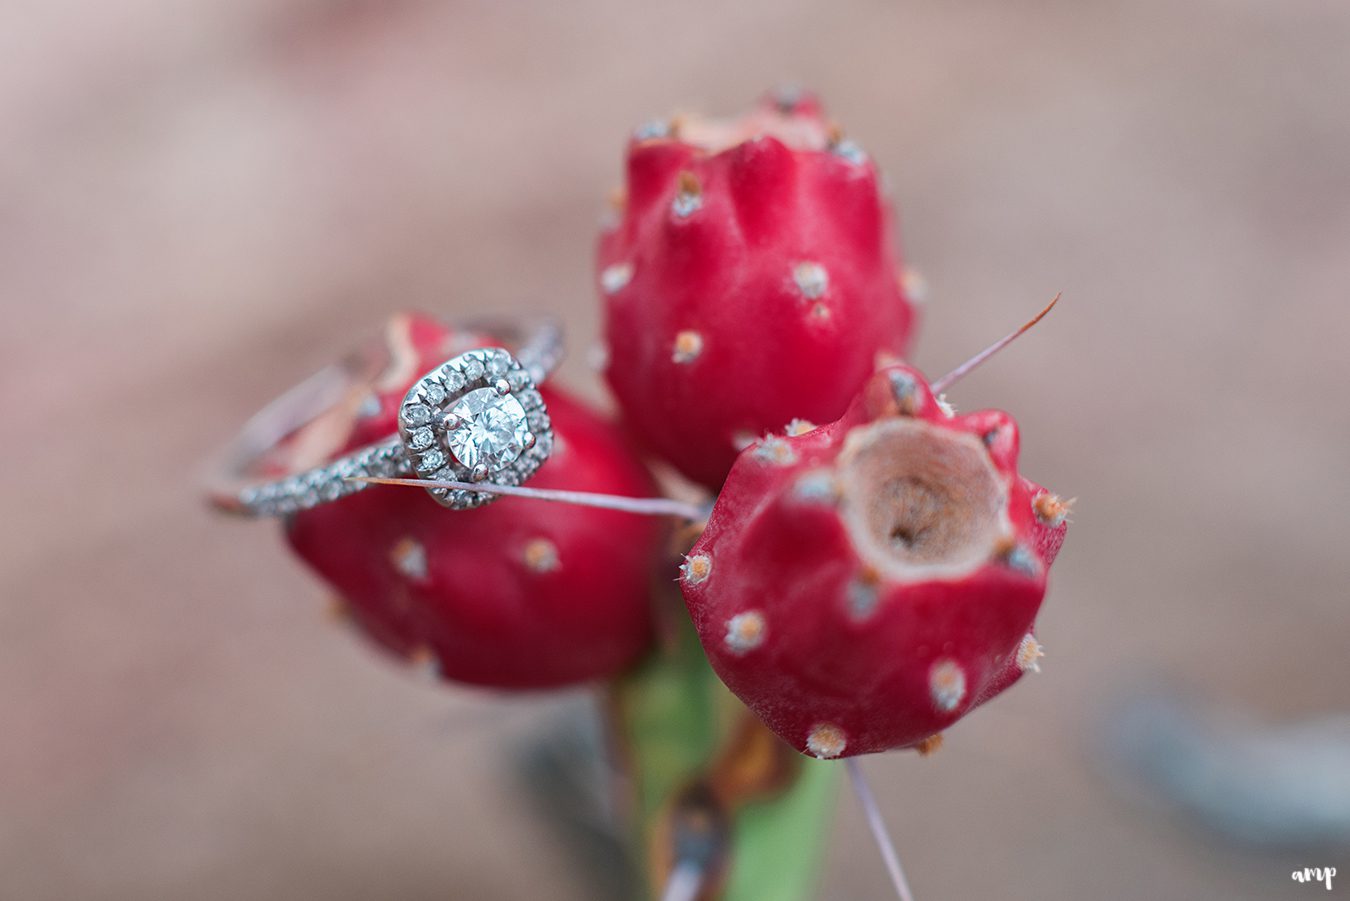 Engagement ring photo on a prickly pear cactus